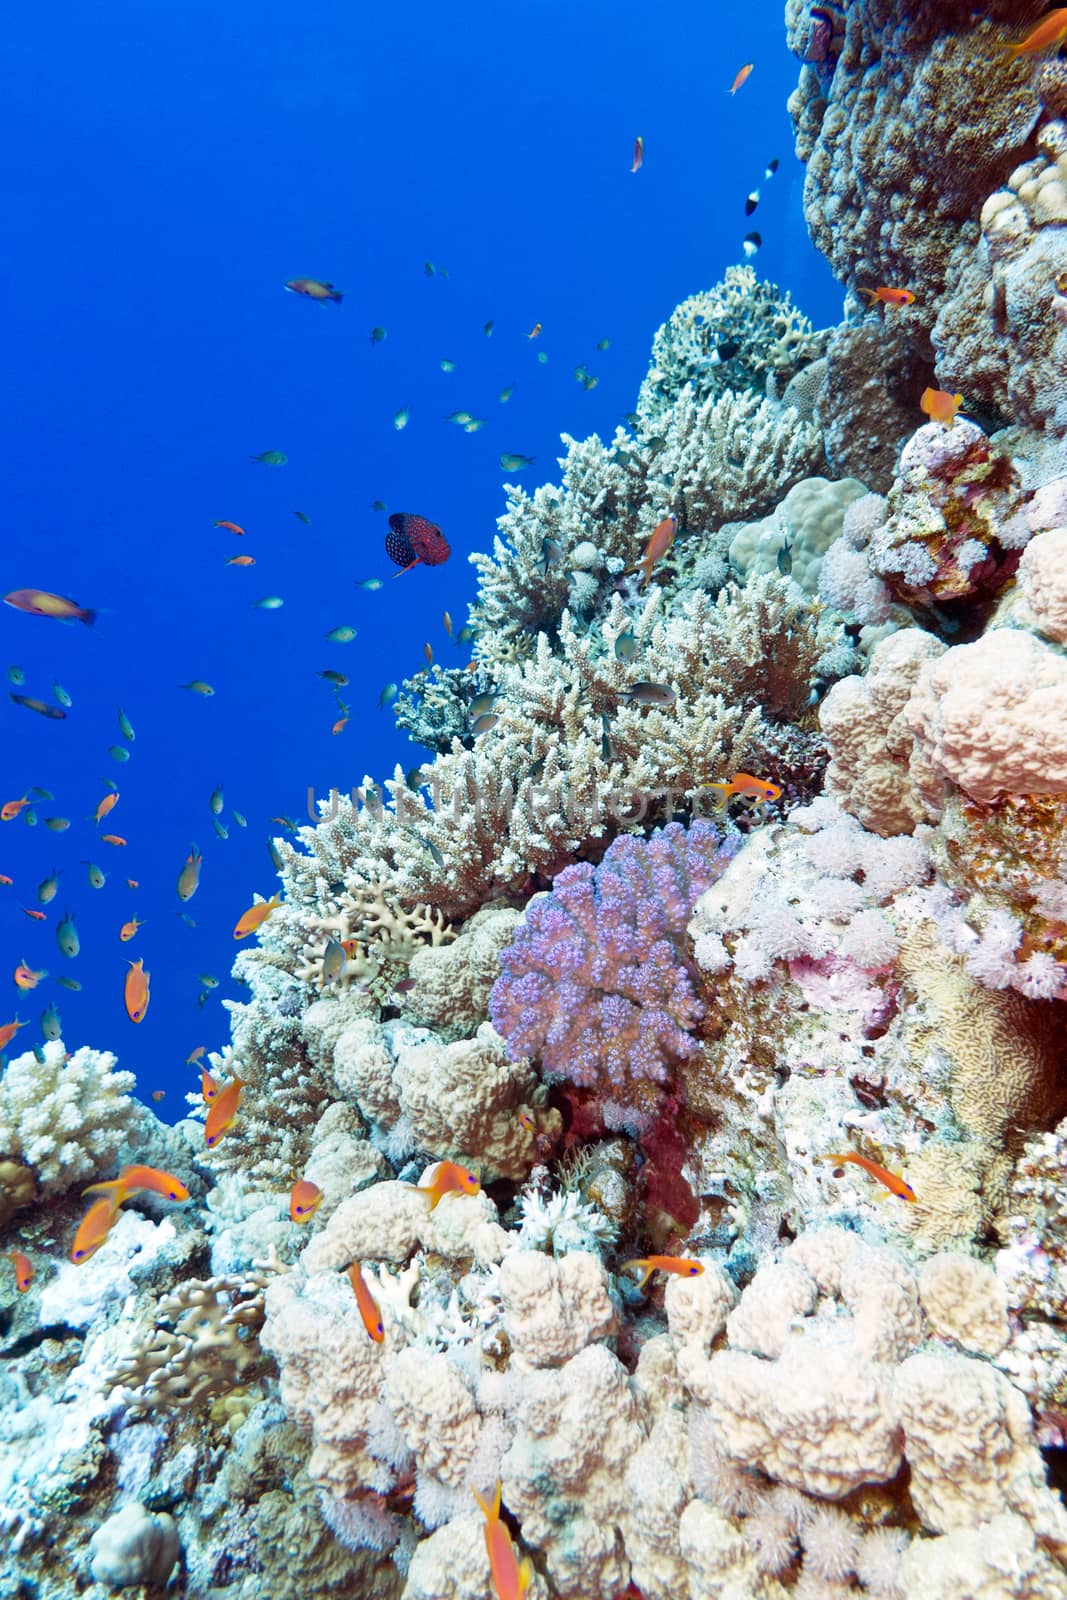 colorful coral reef with exotic fishes in tropical sea on a background of blue water